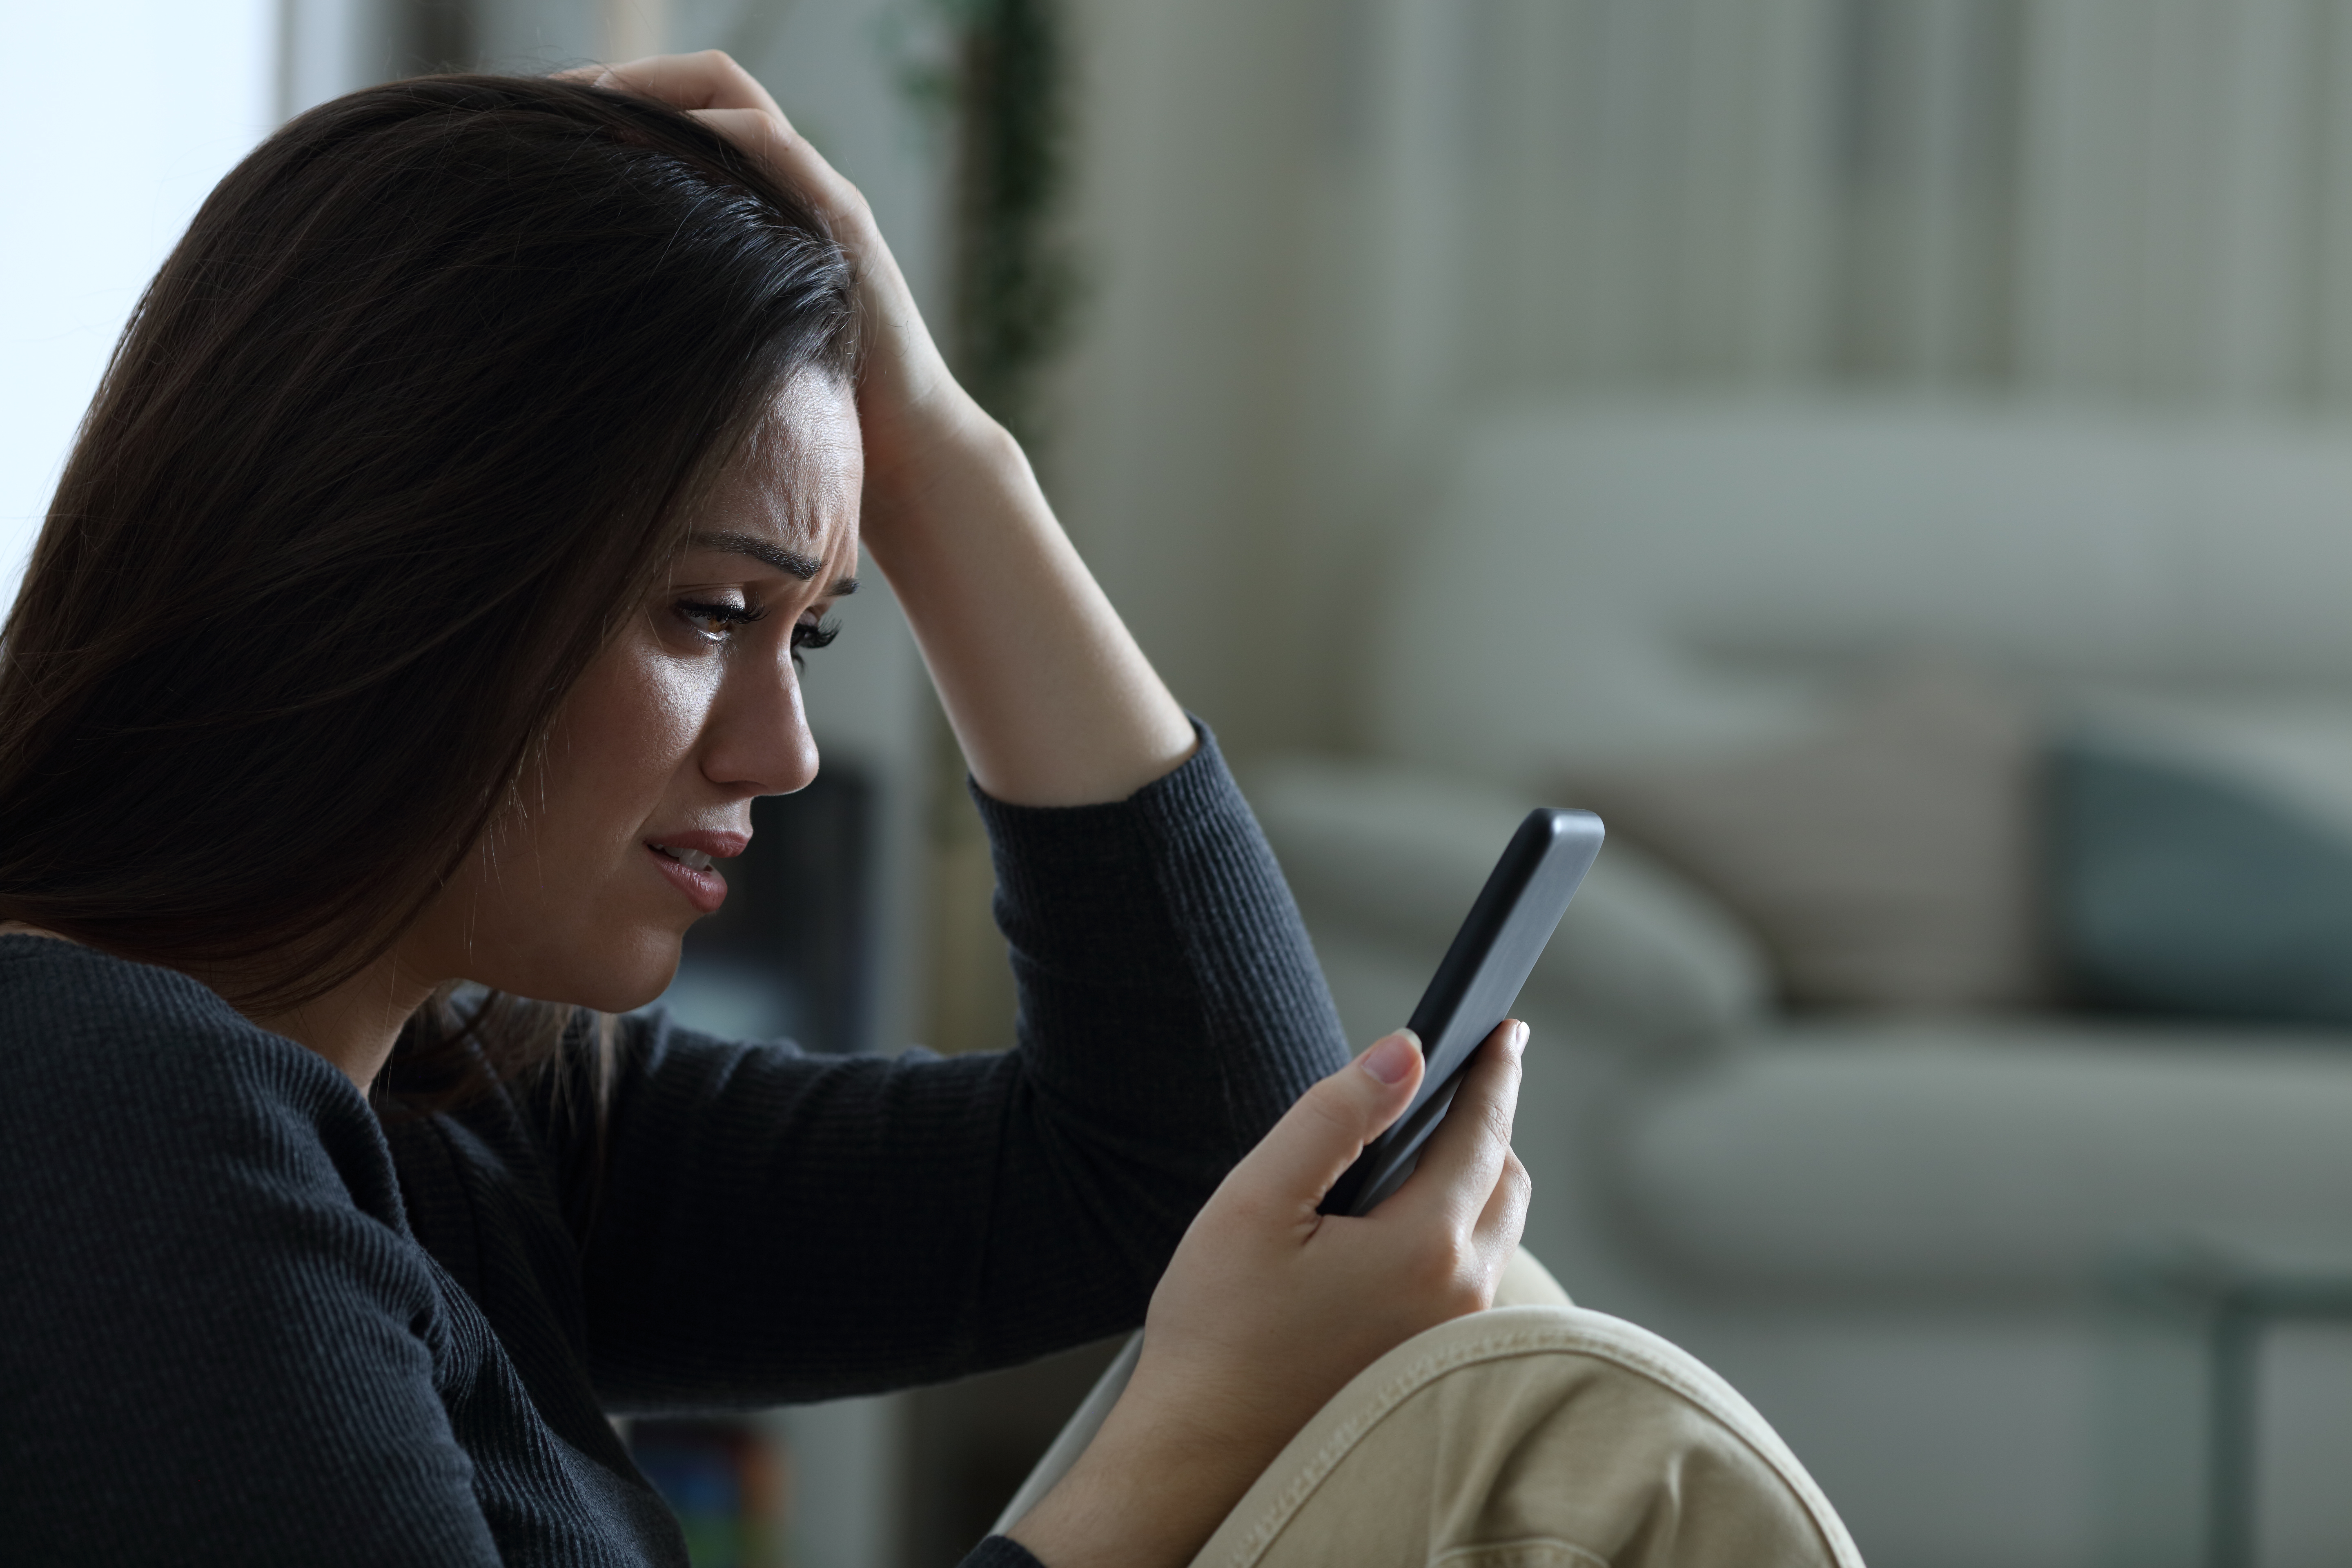 An upset woman looking at her phone | Source: Shutterstock